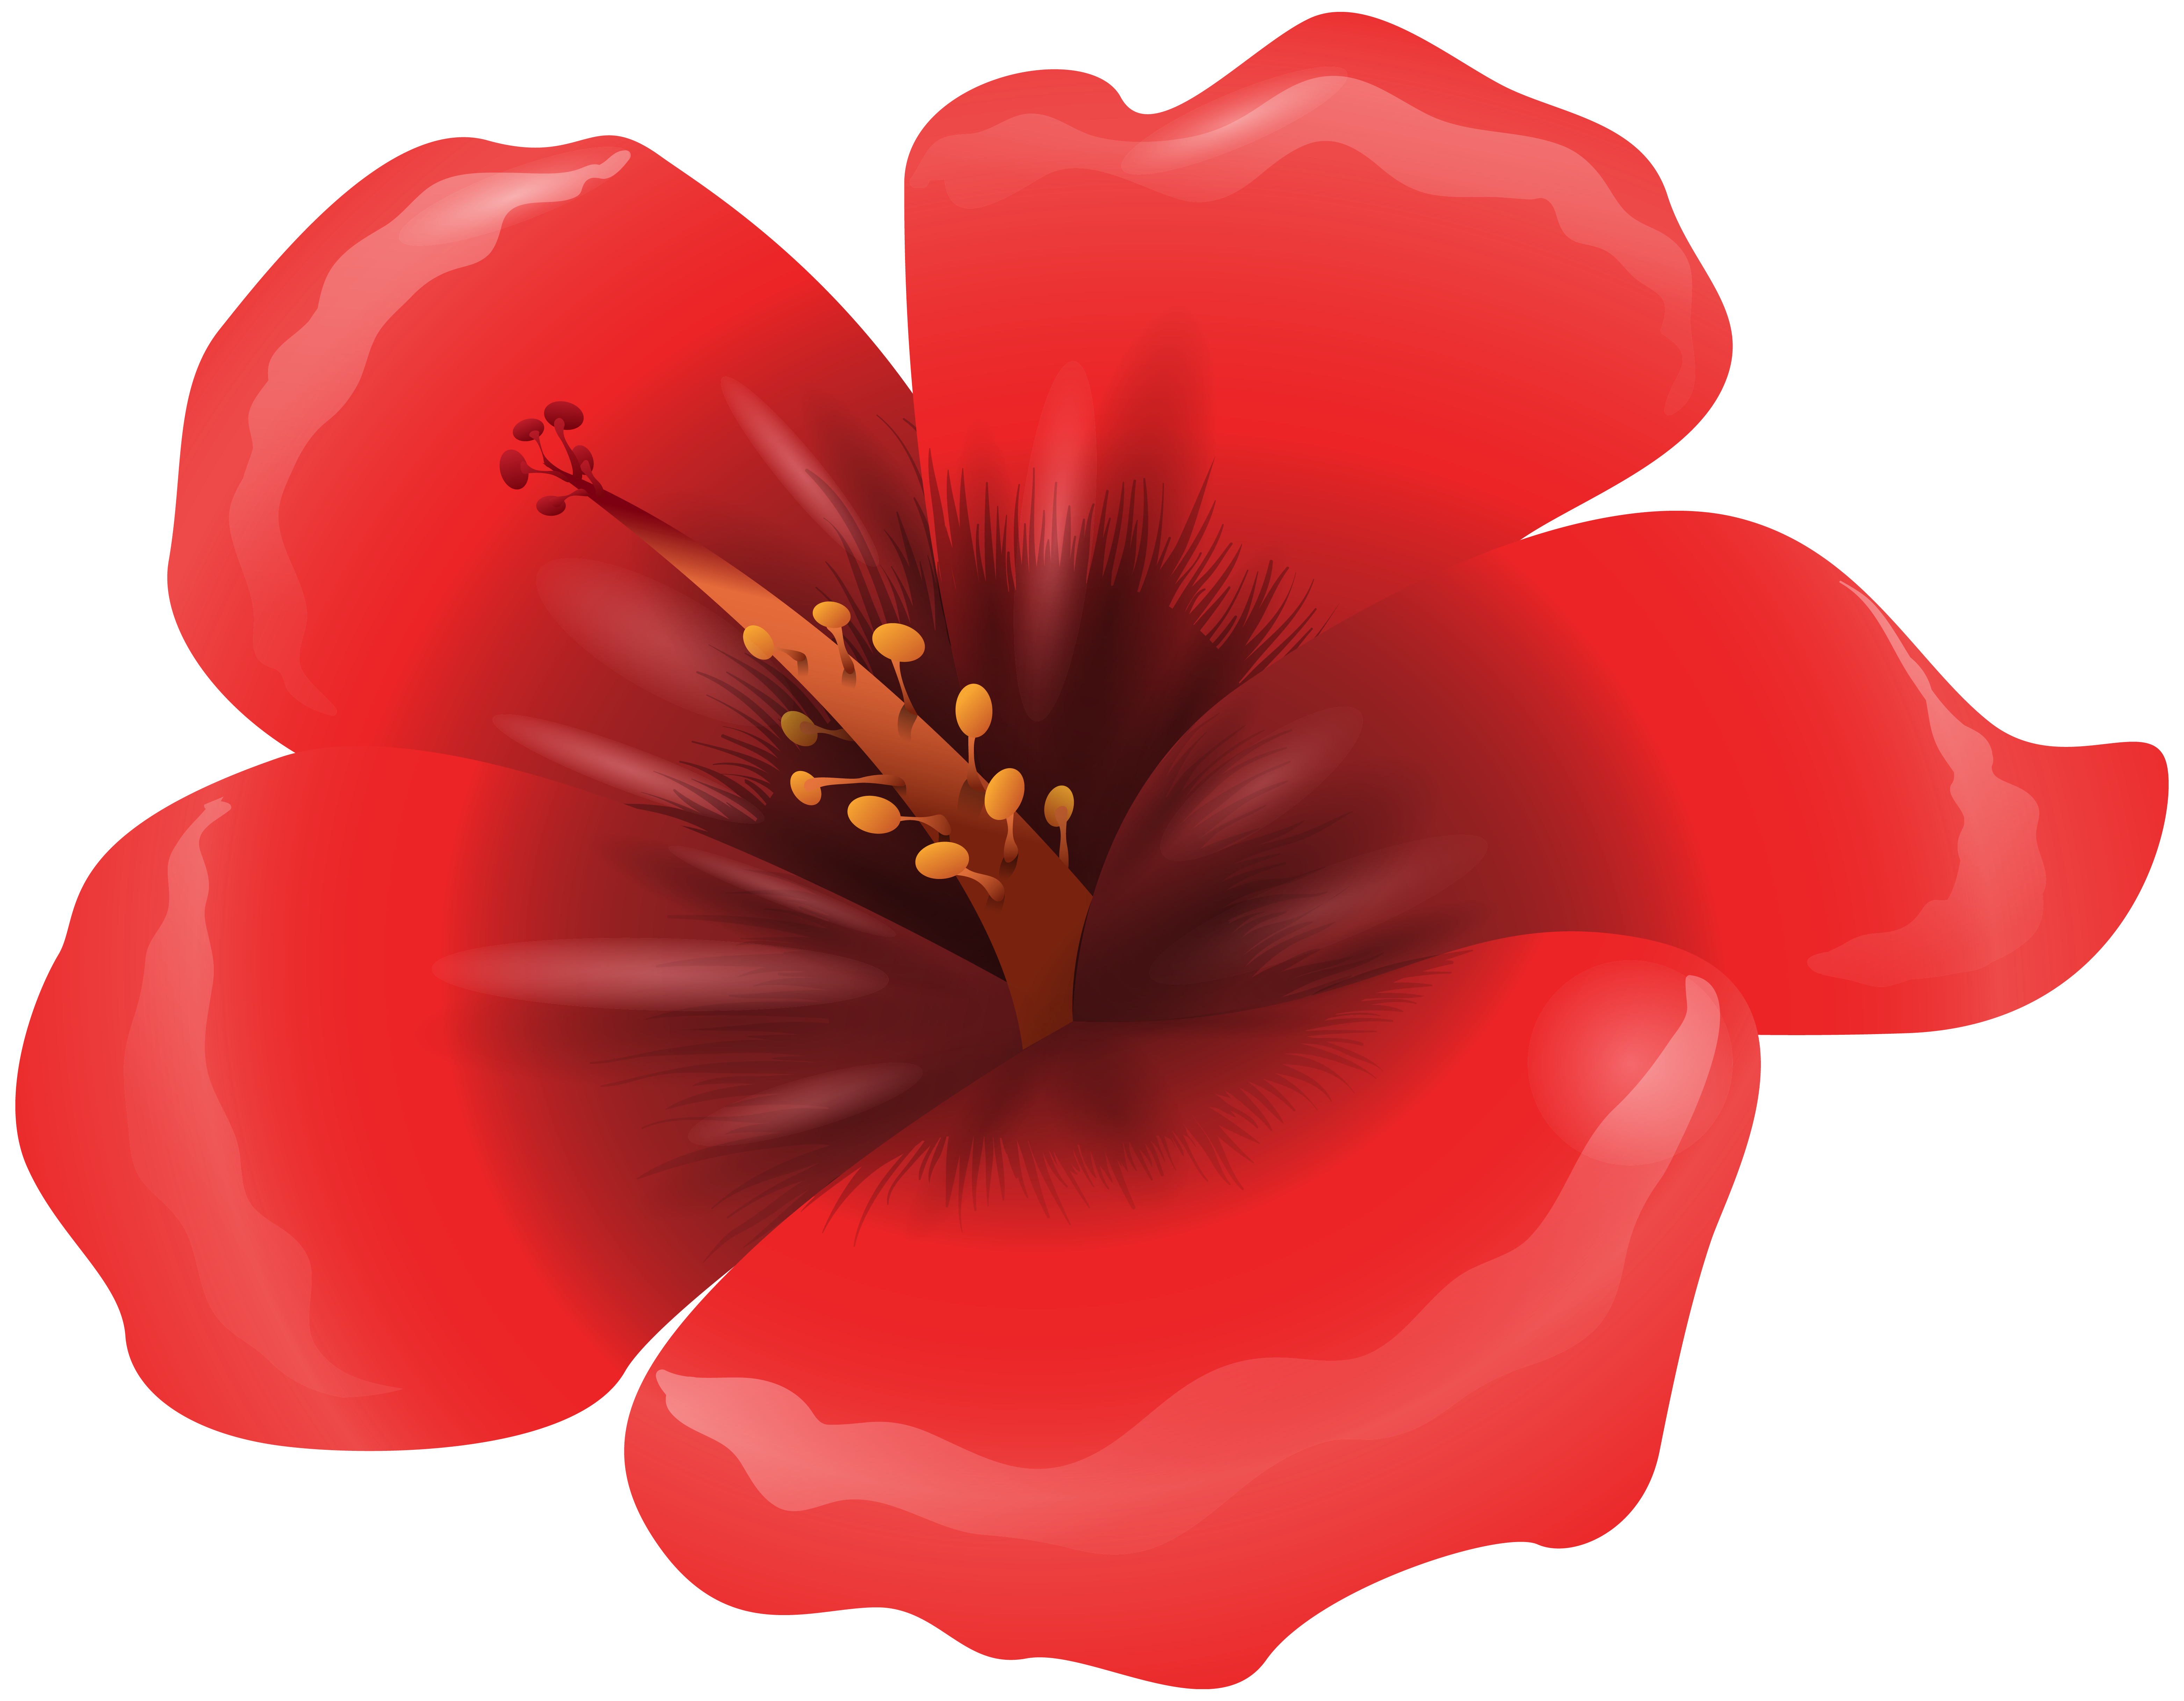 Flower clipart red. Large png image gallery